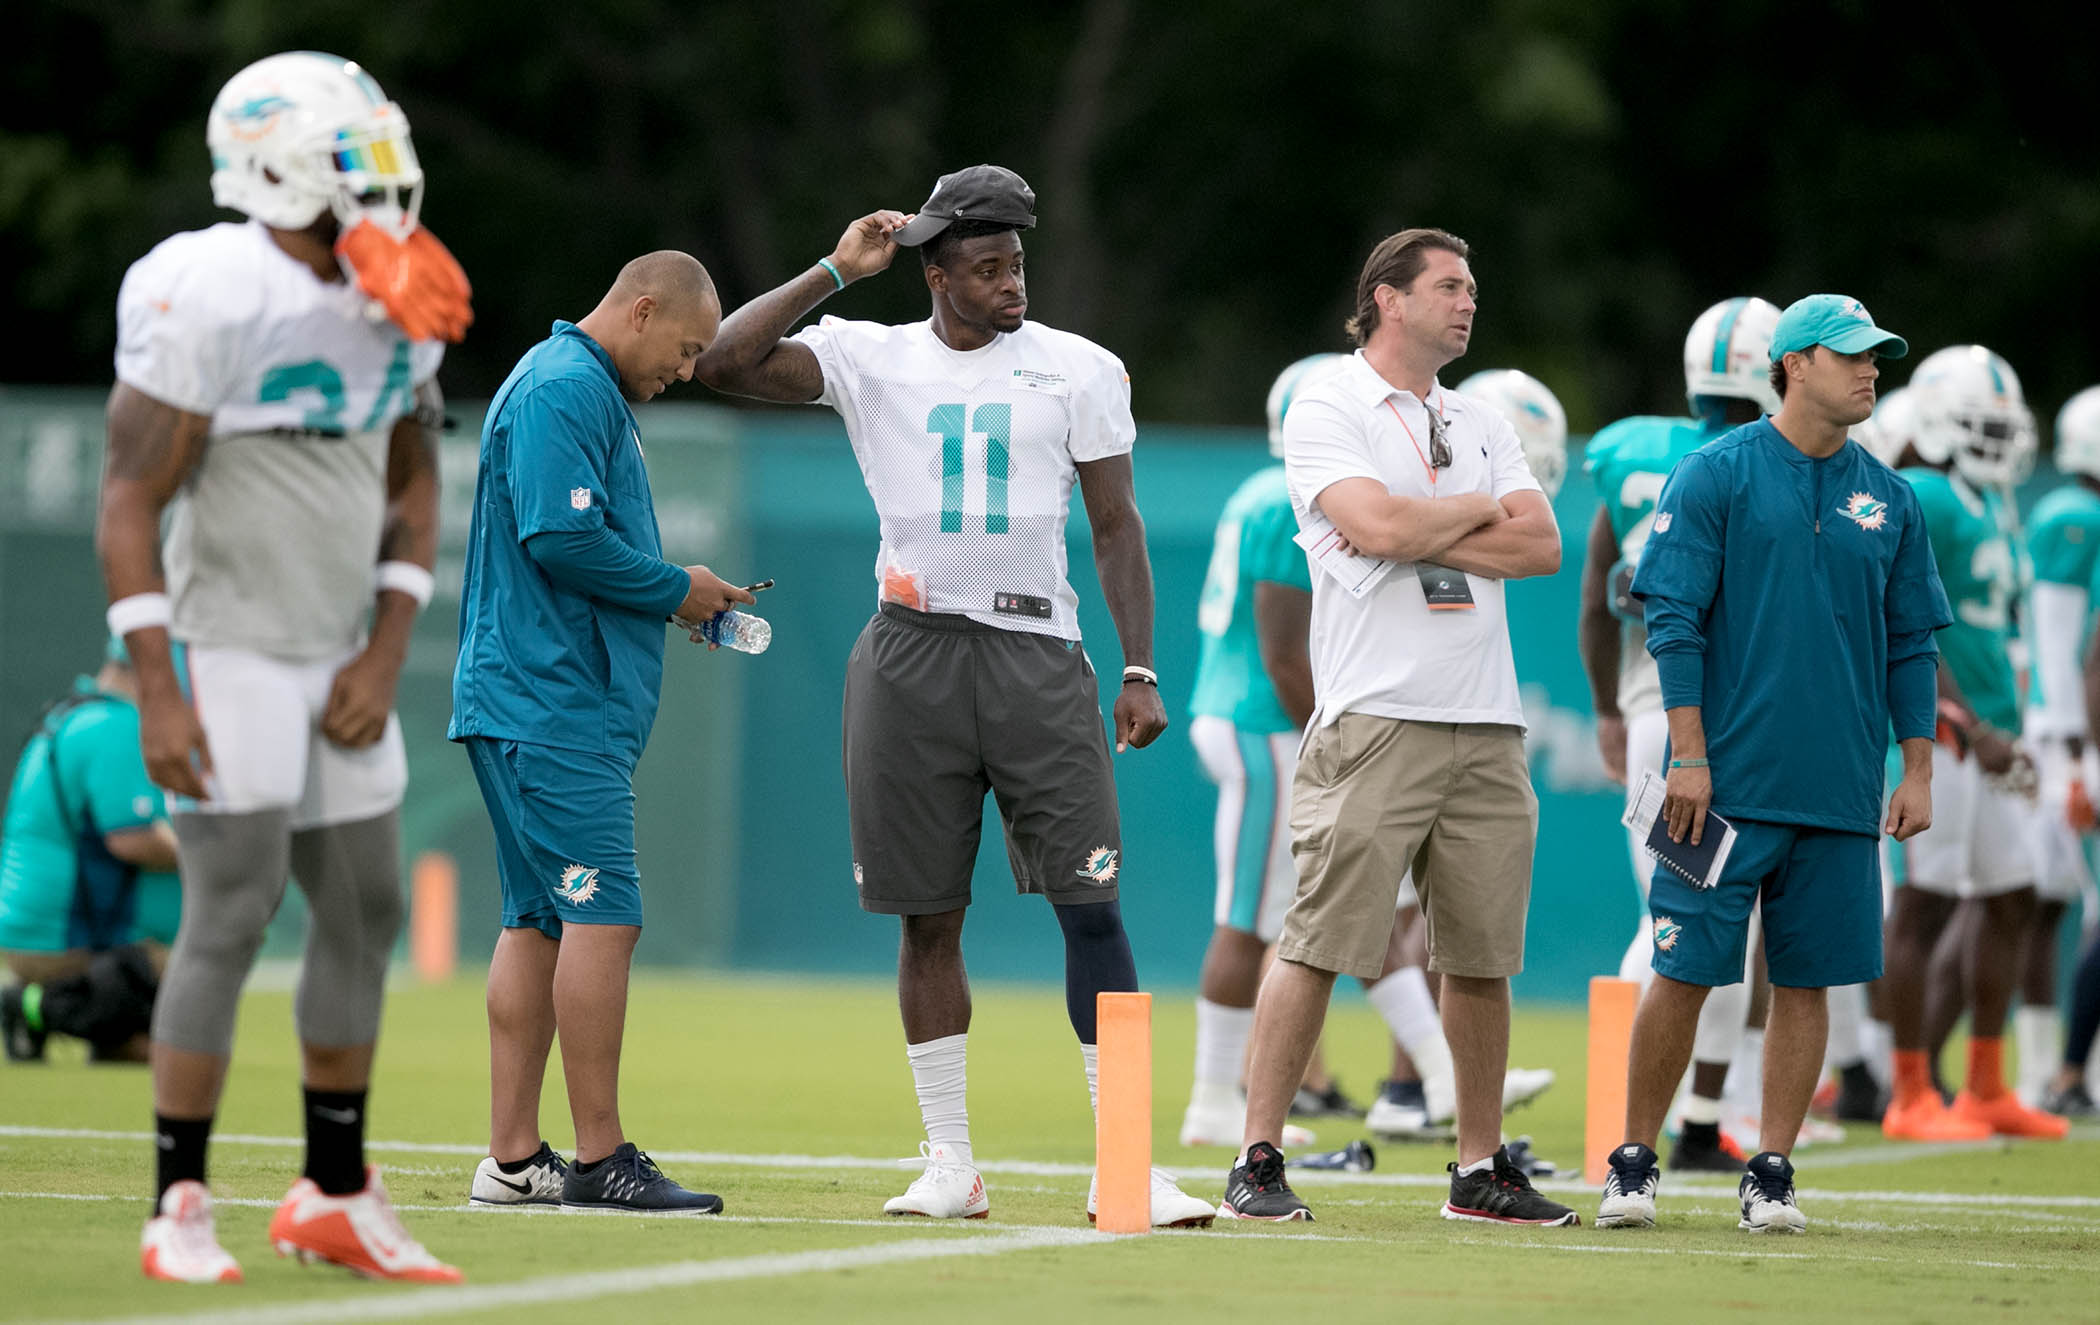 Despite some early bumps in the Dolphins Training Camp, Miami appears much improved